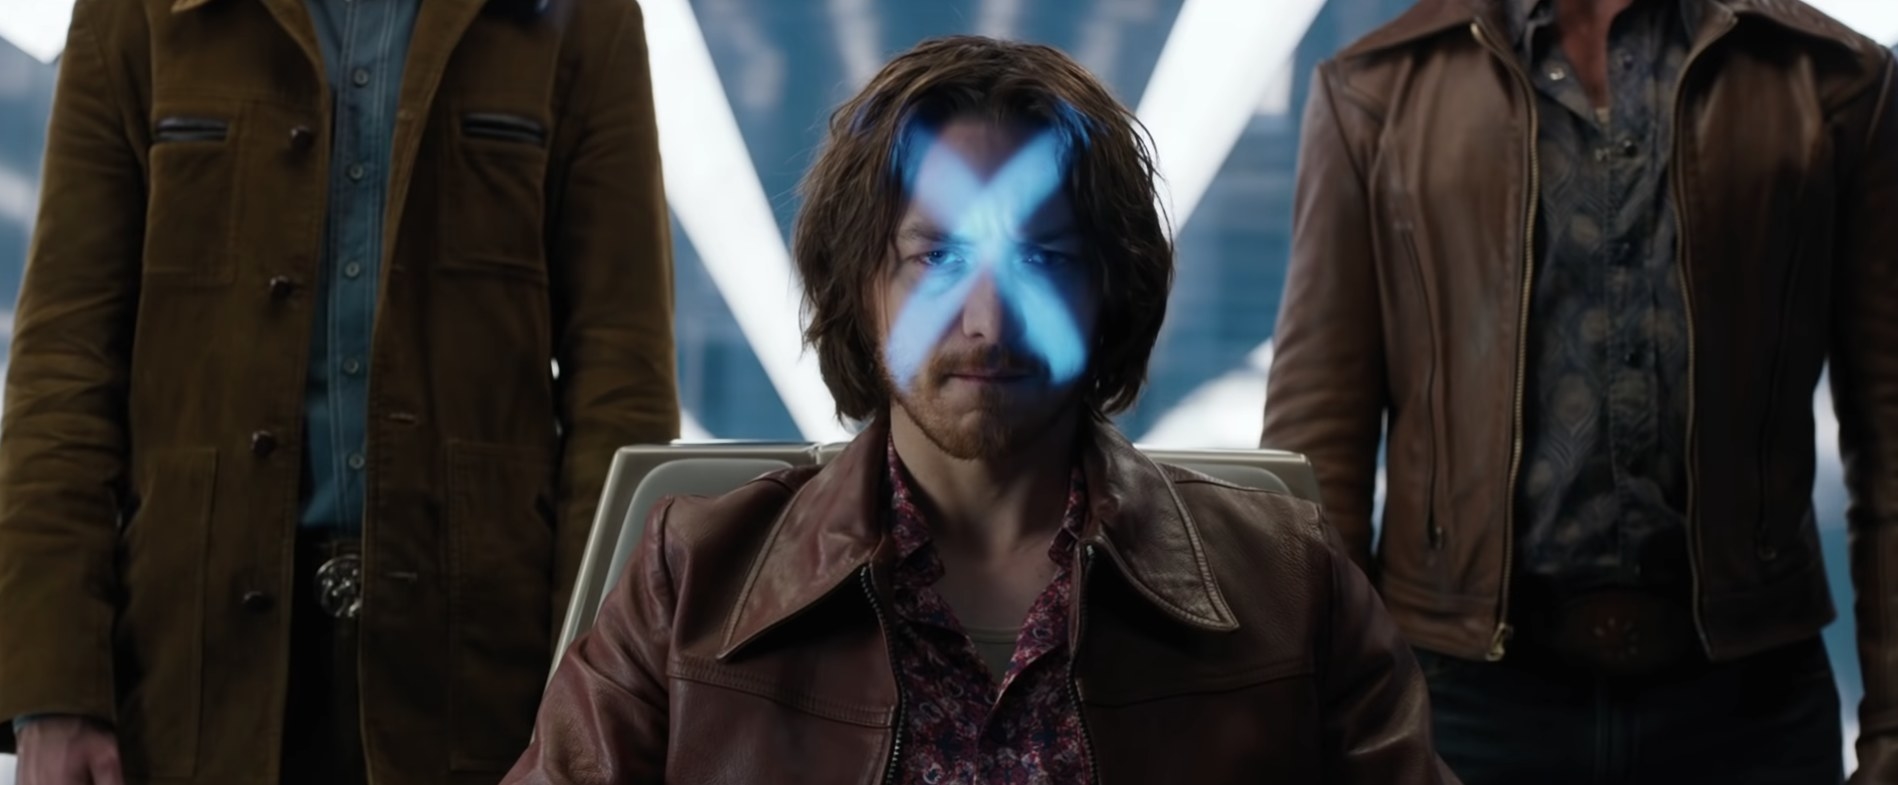 james mcavoy in days of future past